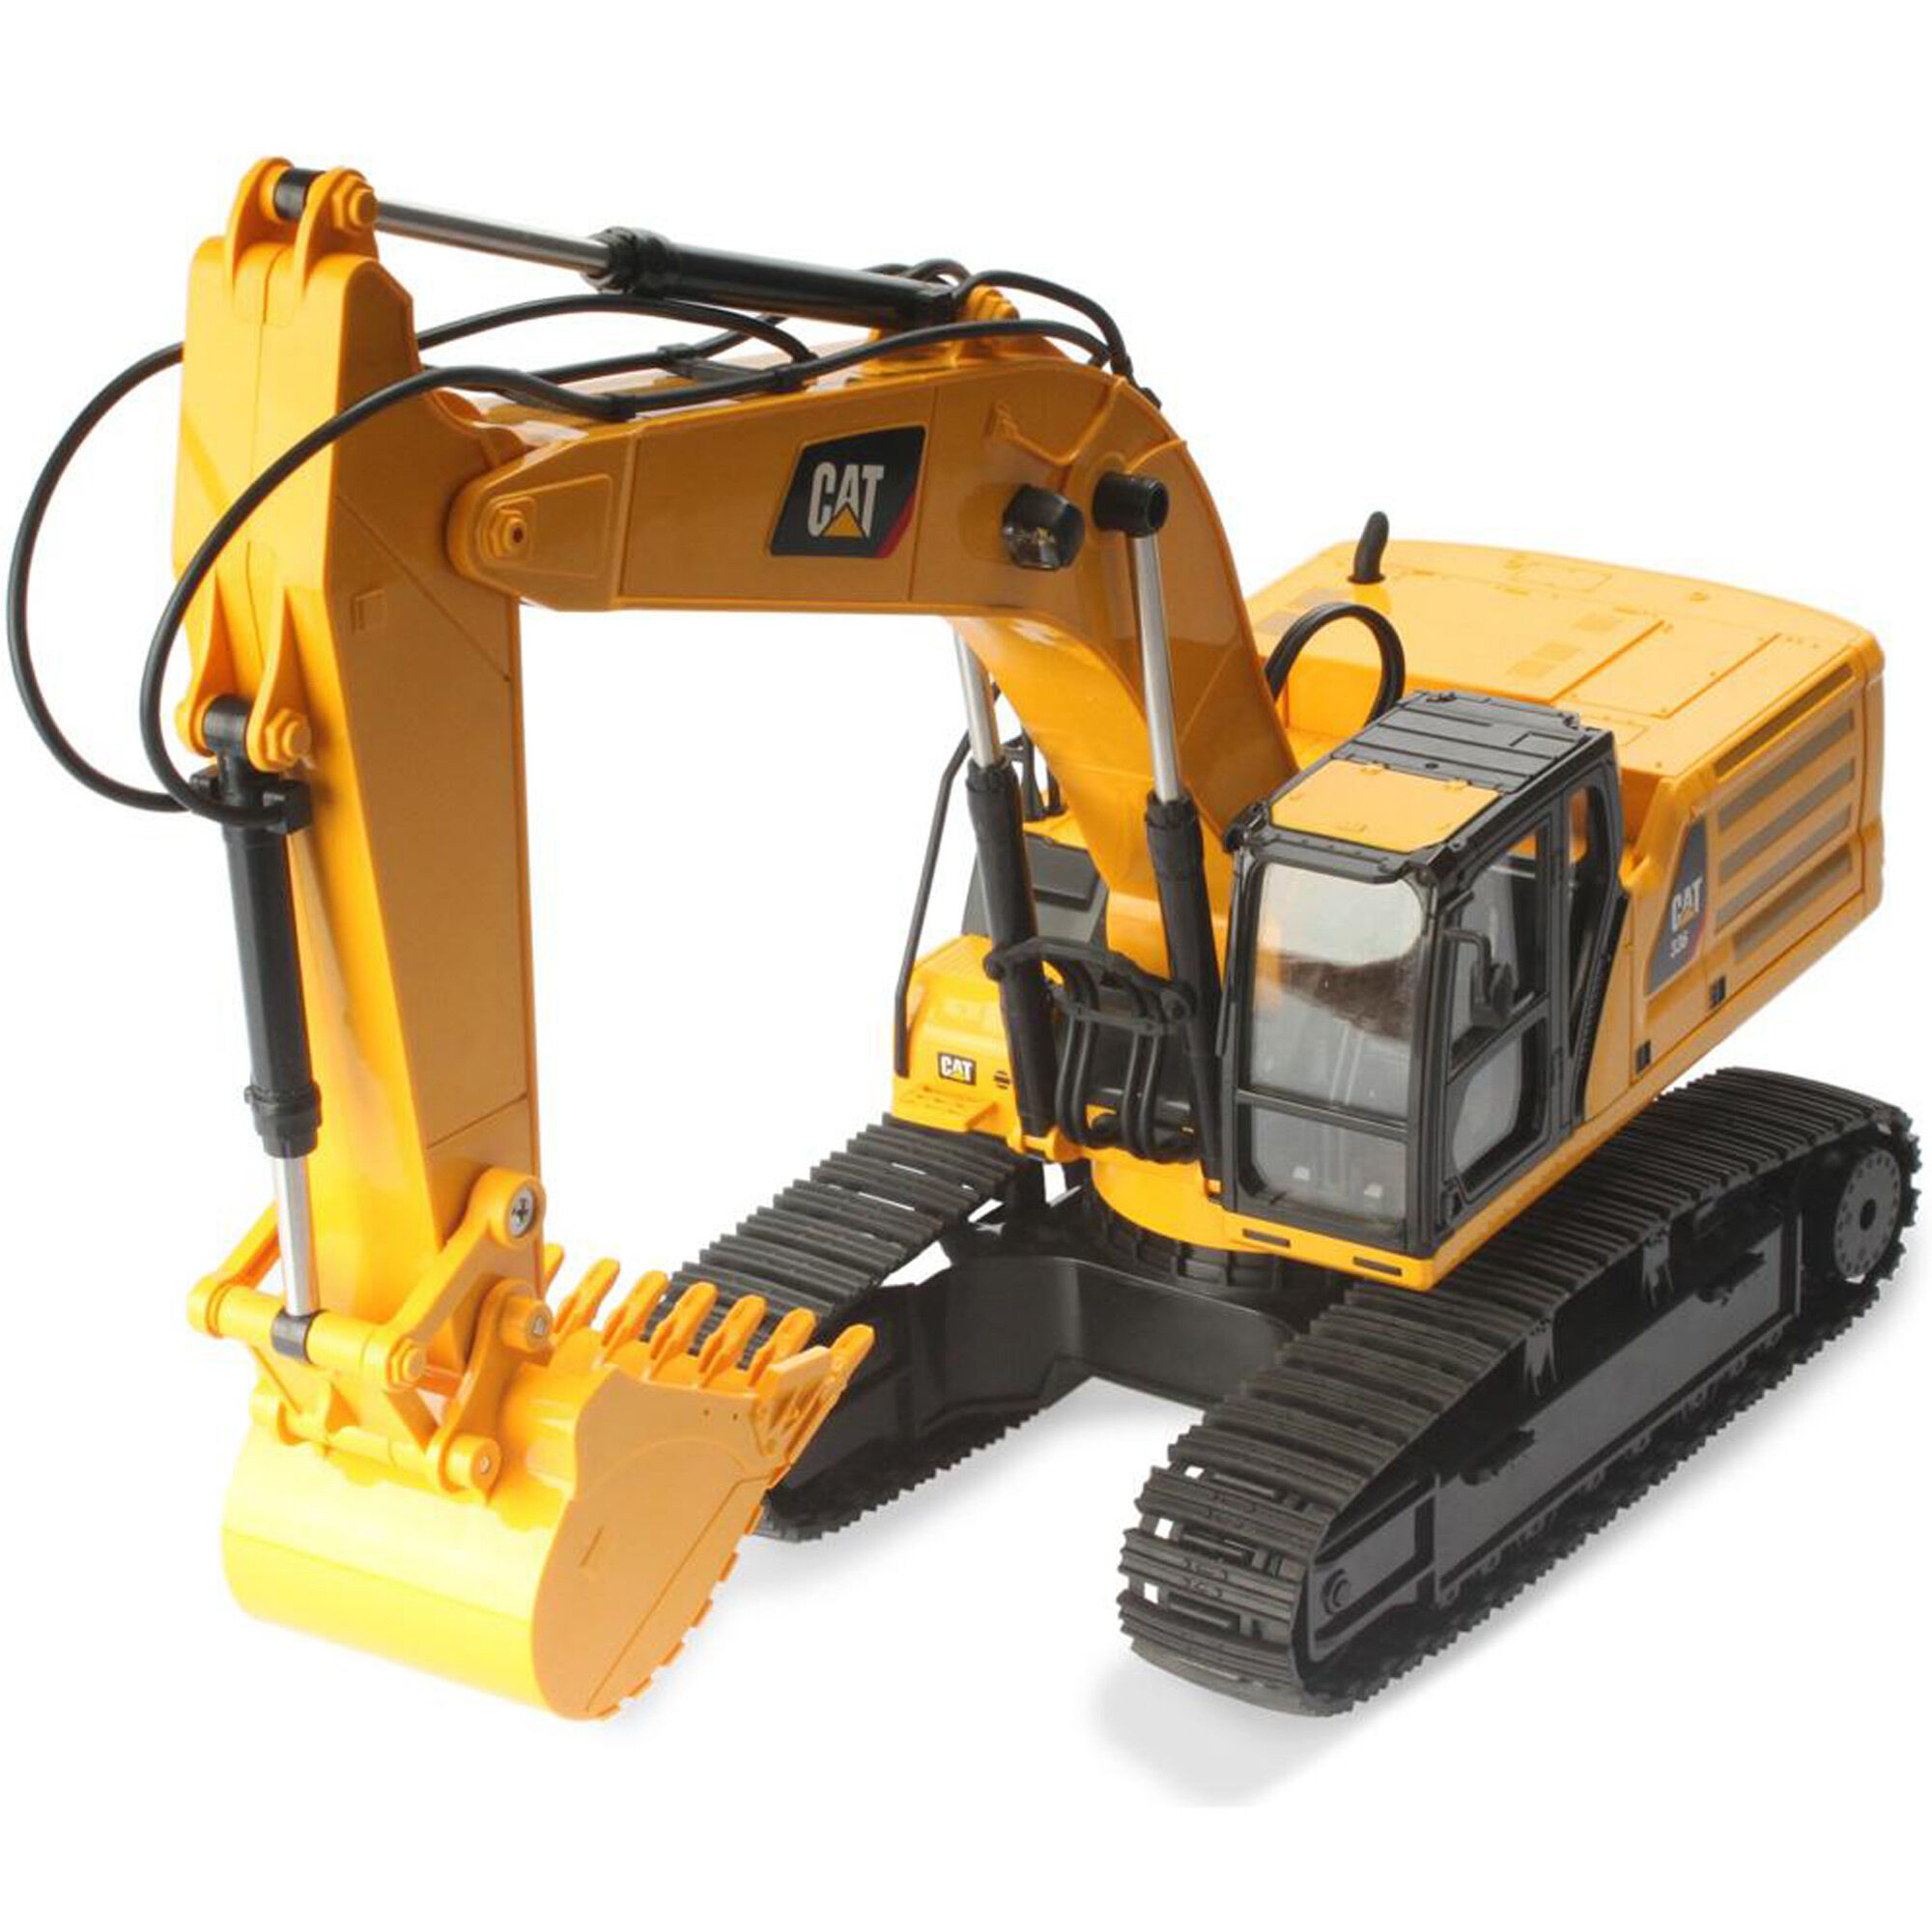 Large Scale 10 Function Radio Control Caterpillar Excavator with Lights Hobby 